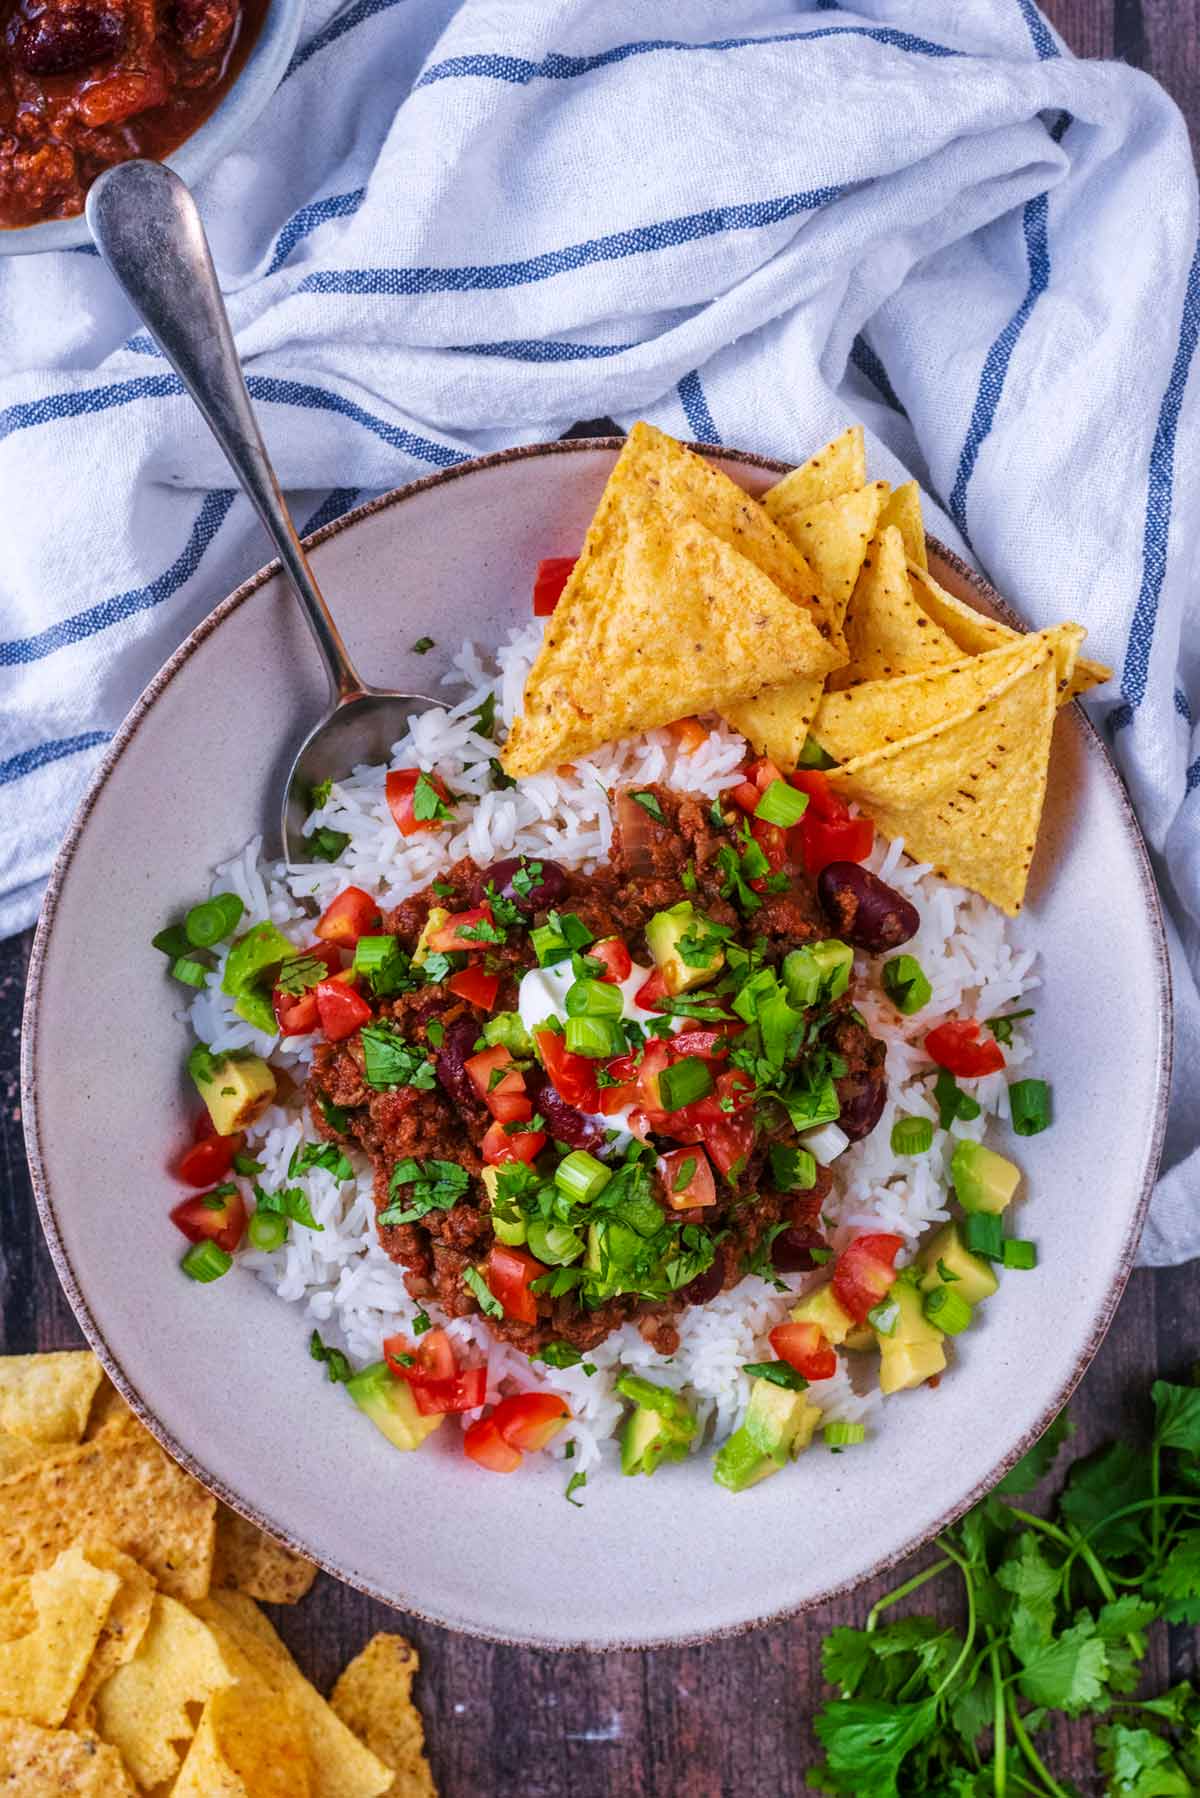 A bowl of chilli and rice next to some tortilla chips and coriander leaves.